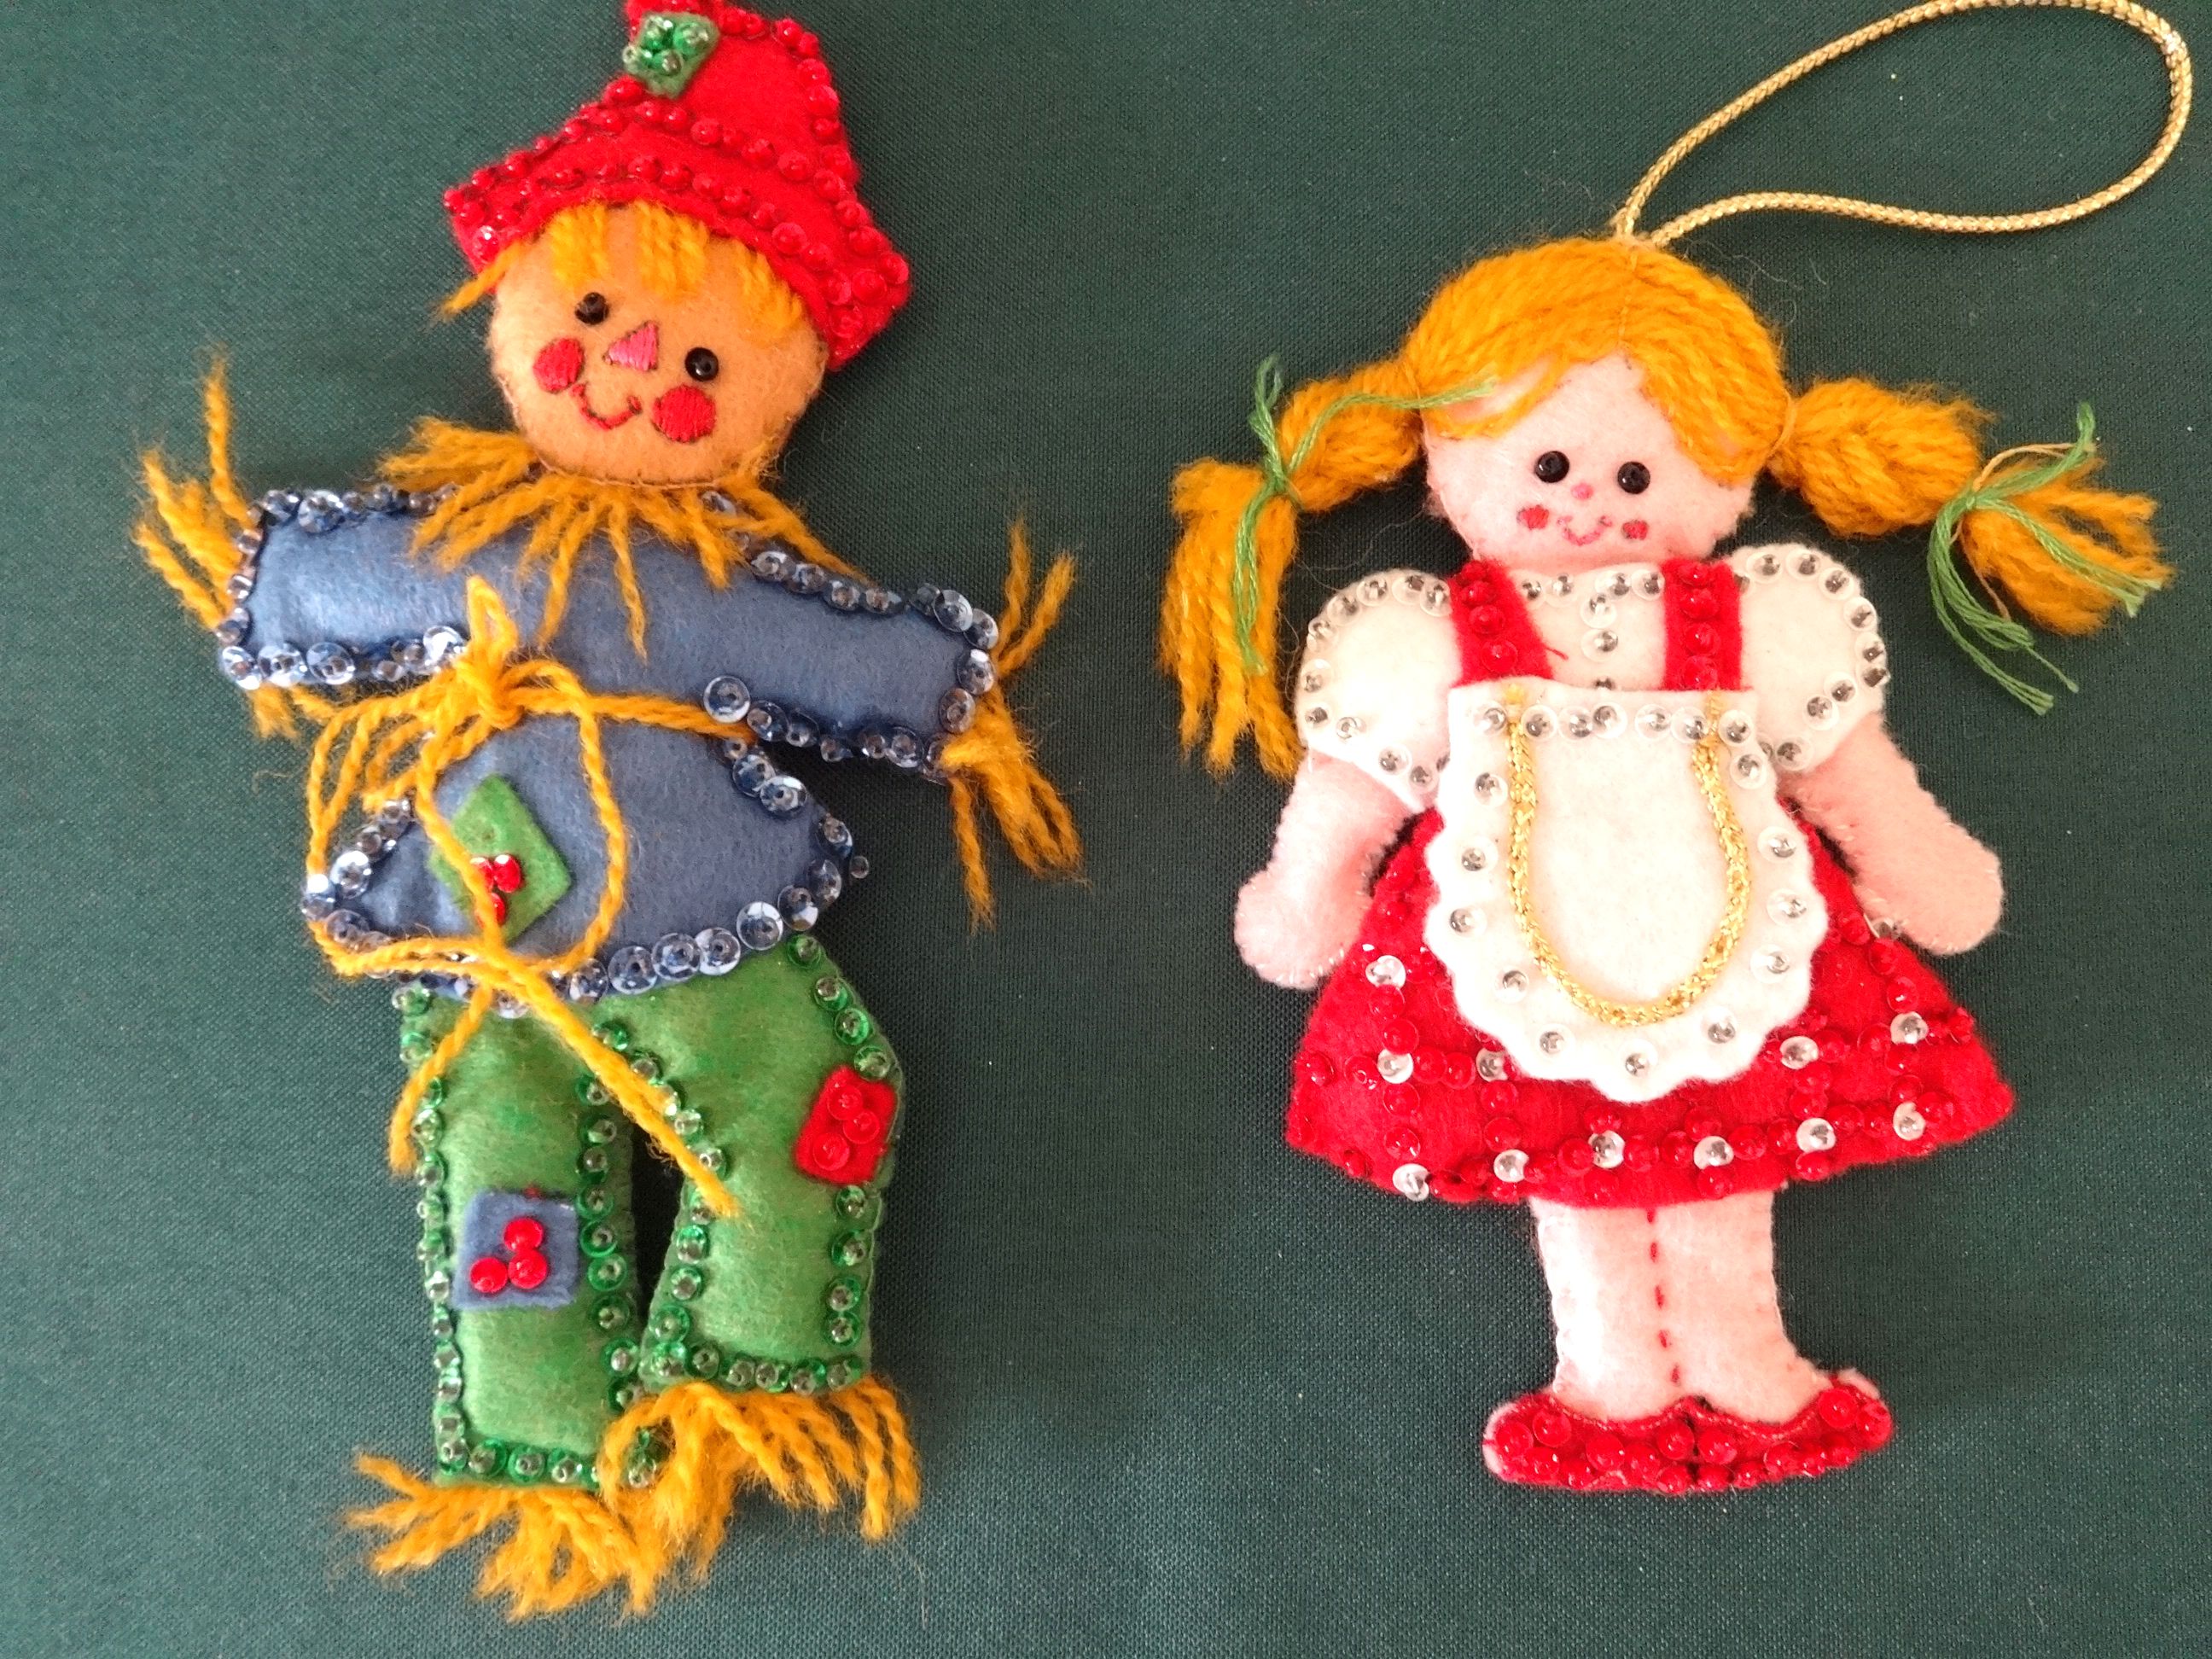 Sold: 4 Vintage Wizard of Oz Holiday Christmas Ornaments, Felt + 